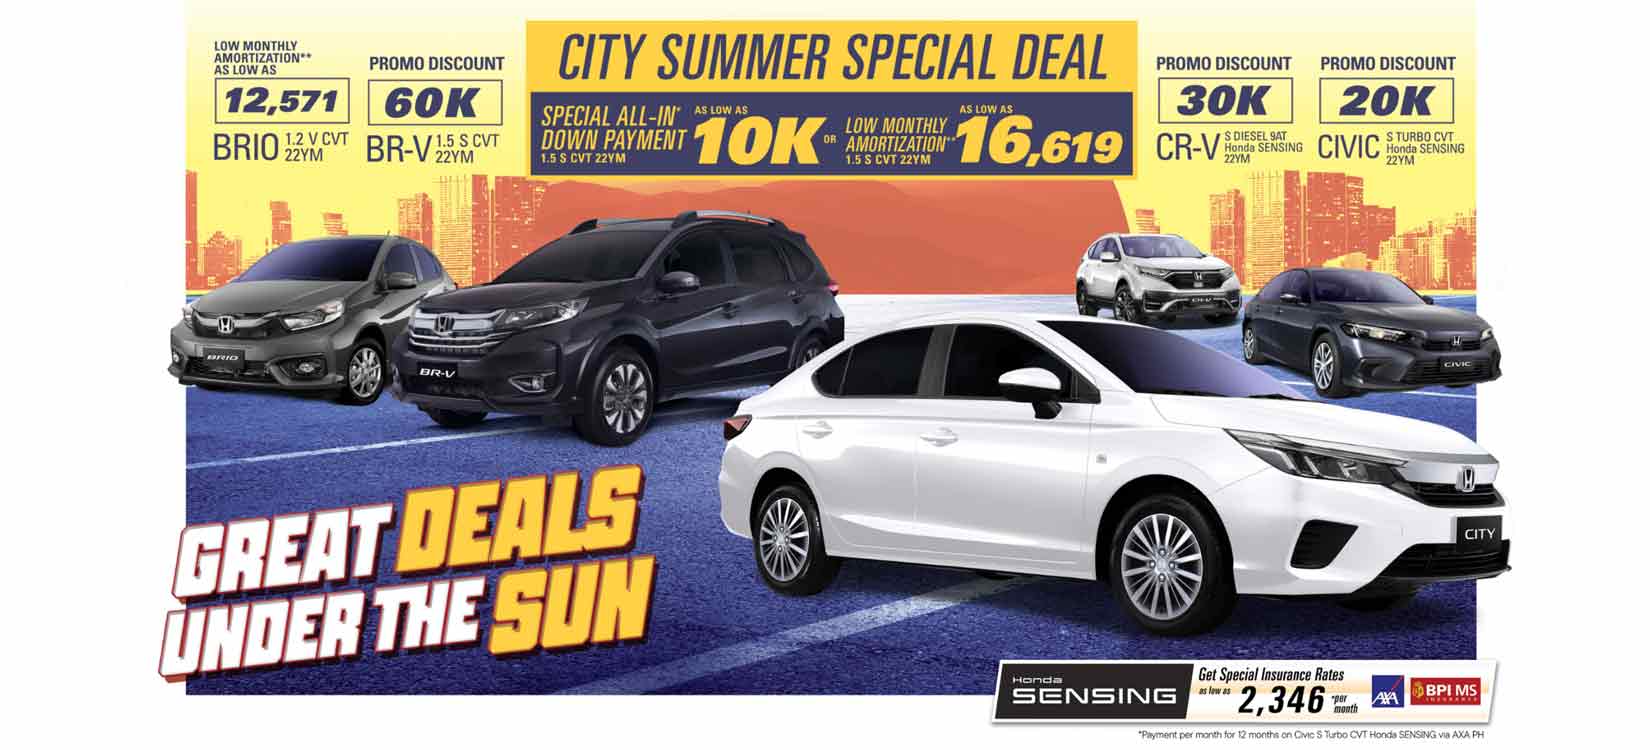 Own your dream Honda this April with “Great Deals Under the Sun” promo